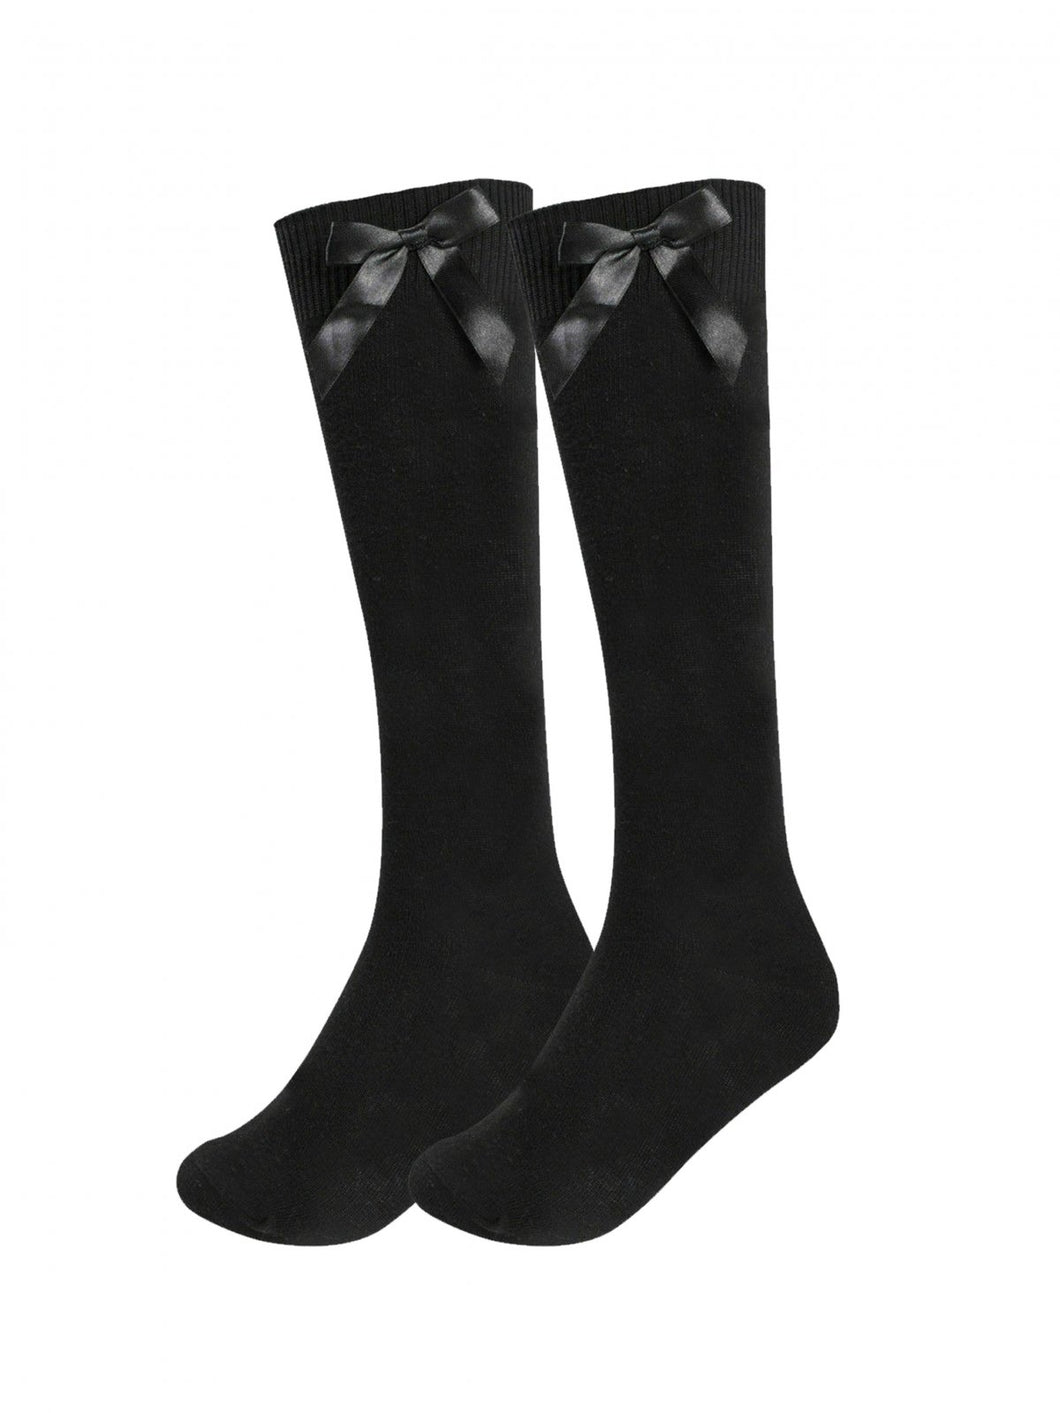 1 Pack Black Knee high Socks with bow